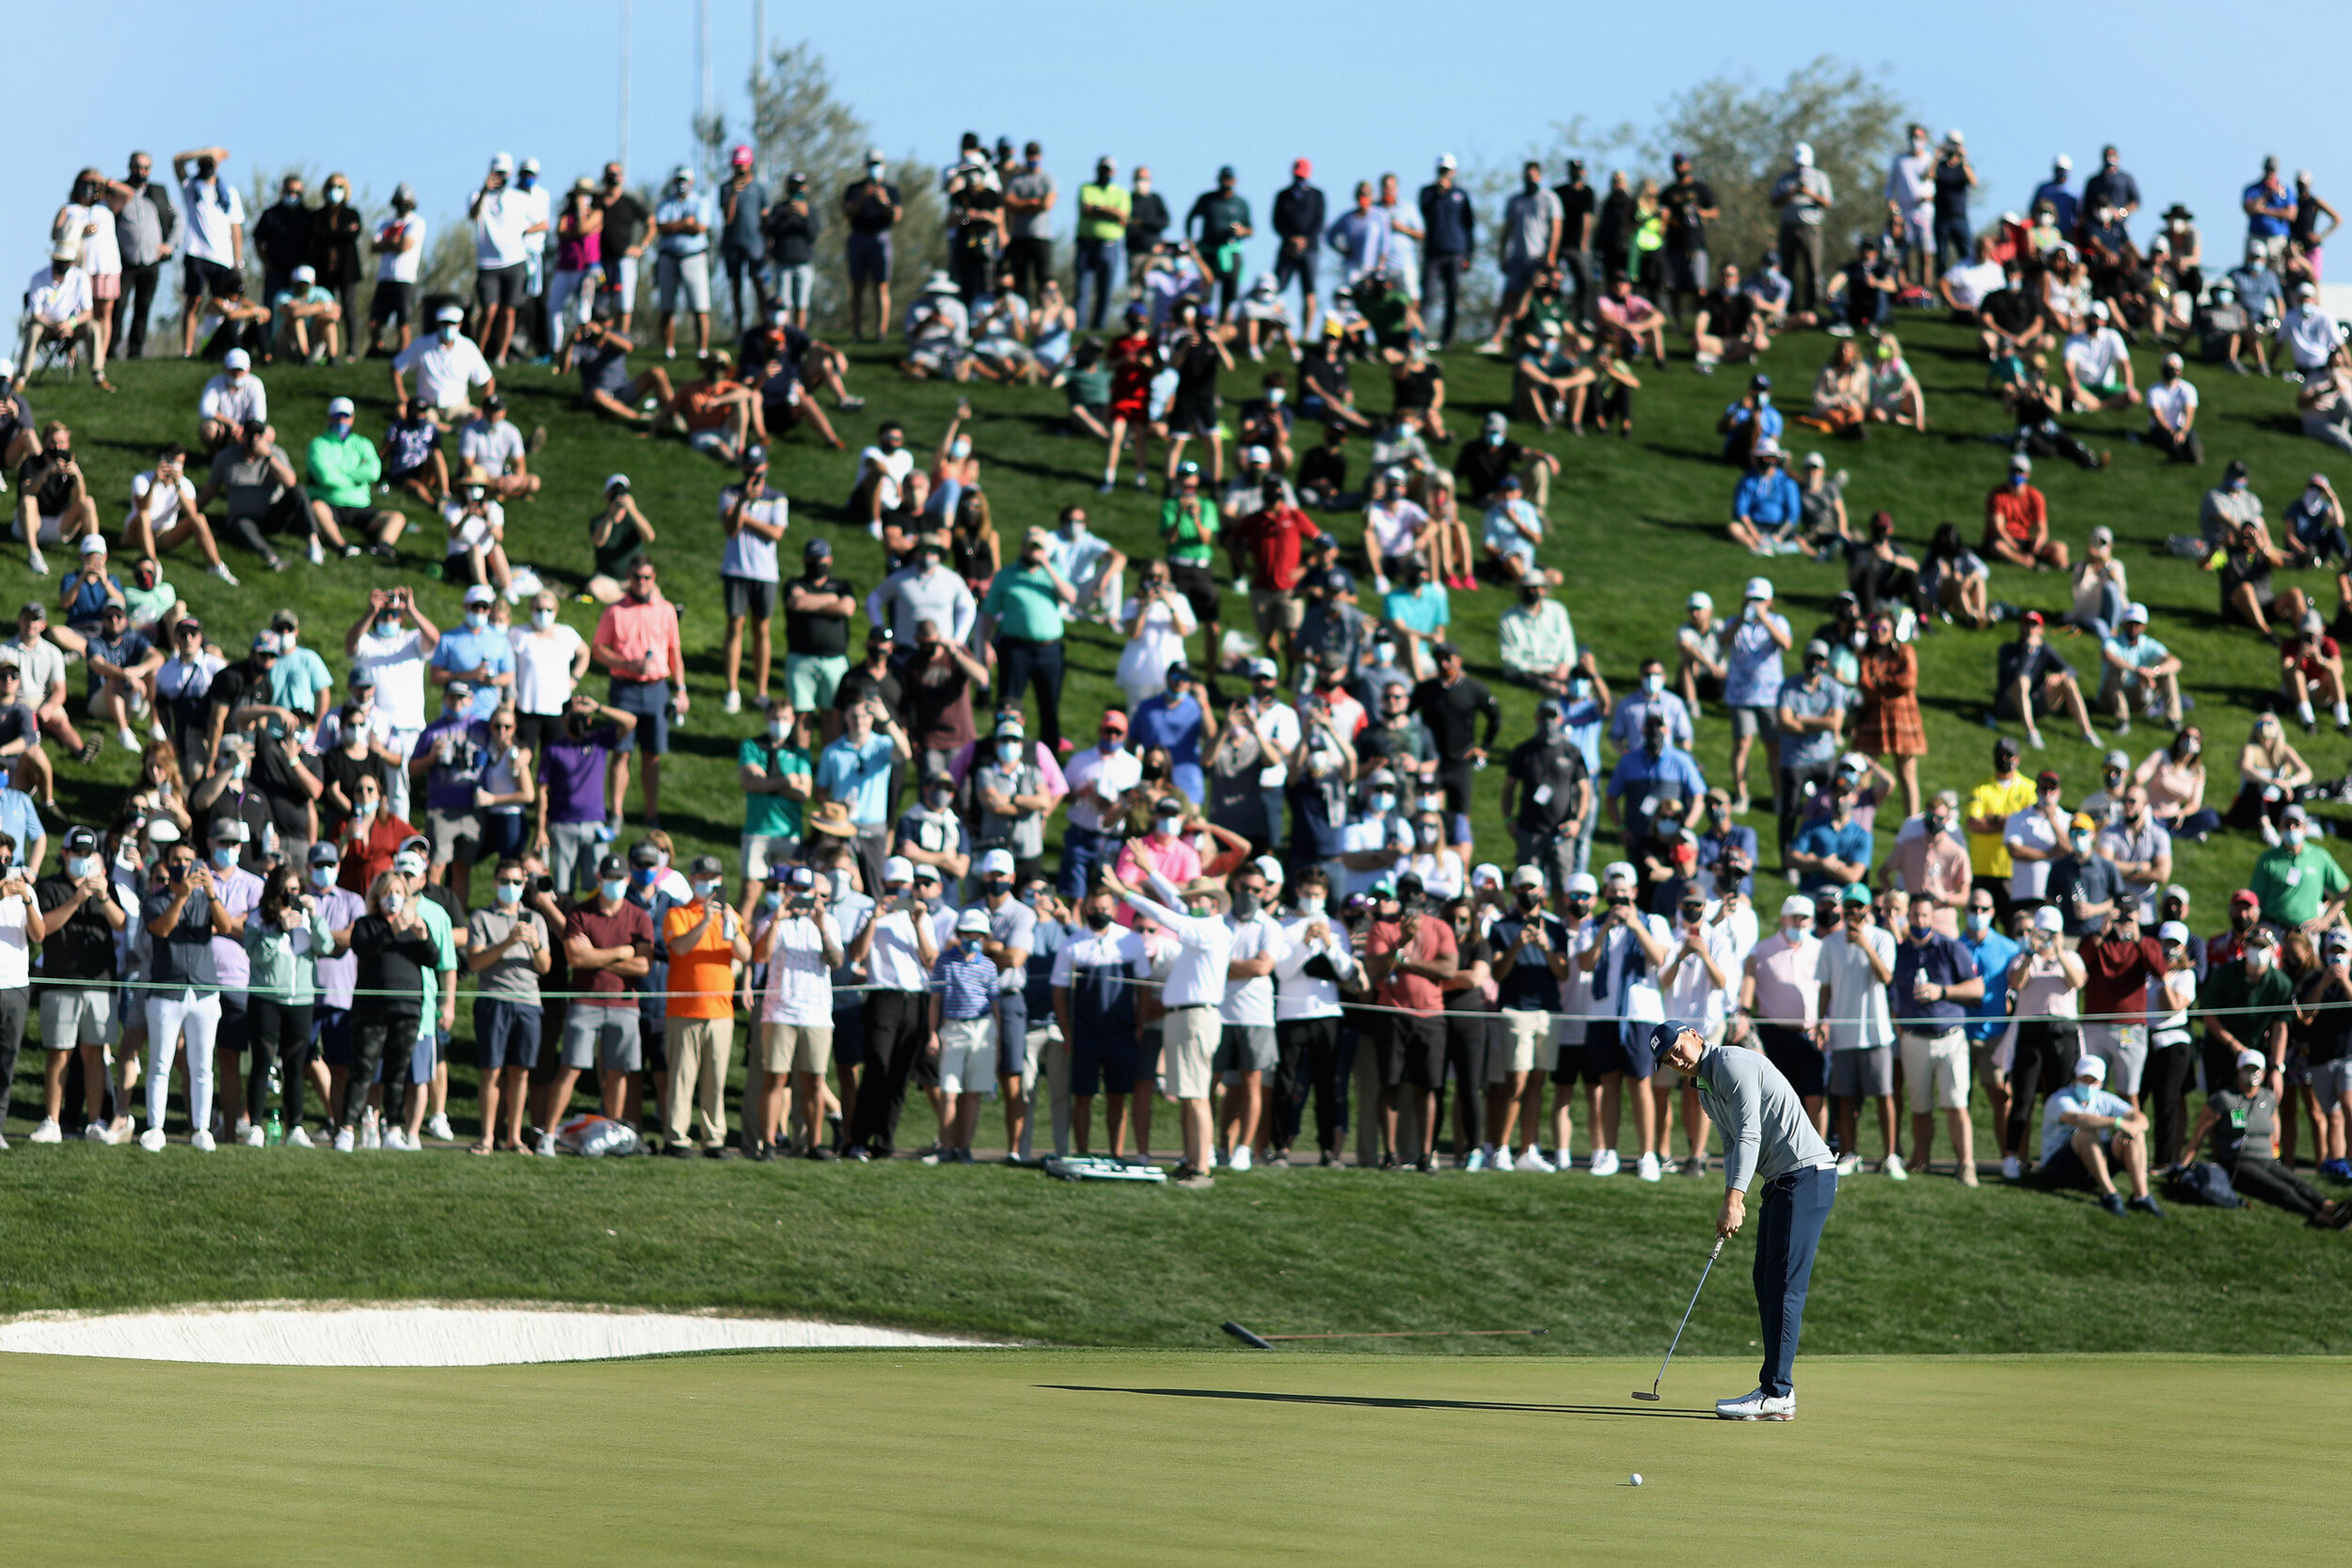  SCOTTSDALE, ARIZONA - FEBRUARY 06: Jordan Spieth of the United States putts on the 18th green during the third round of the Waste Management Phoenix Open at TPC Scottsdale on February 06, 2021 in Scottsdale, Arizona. (Photo by Christian Petersen/Get